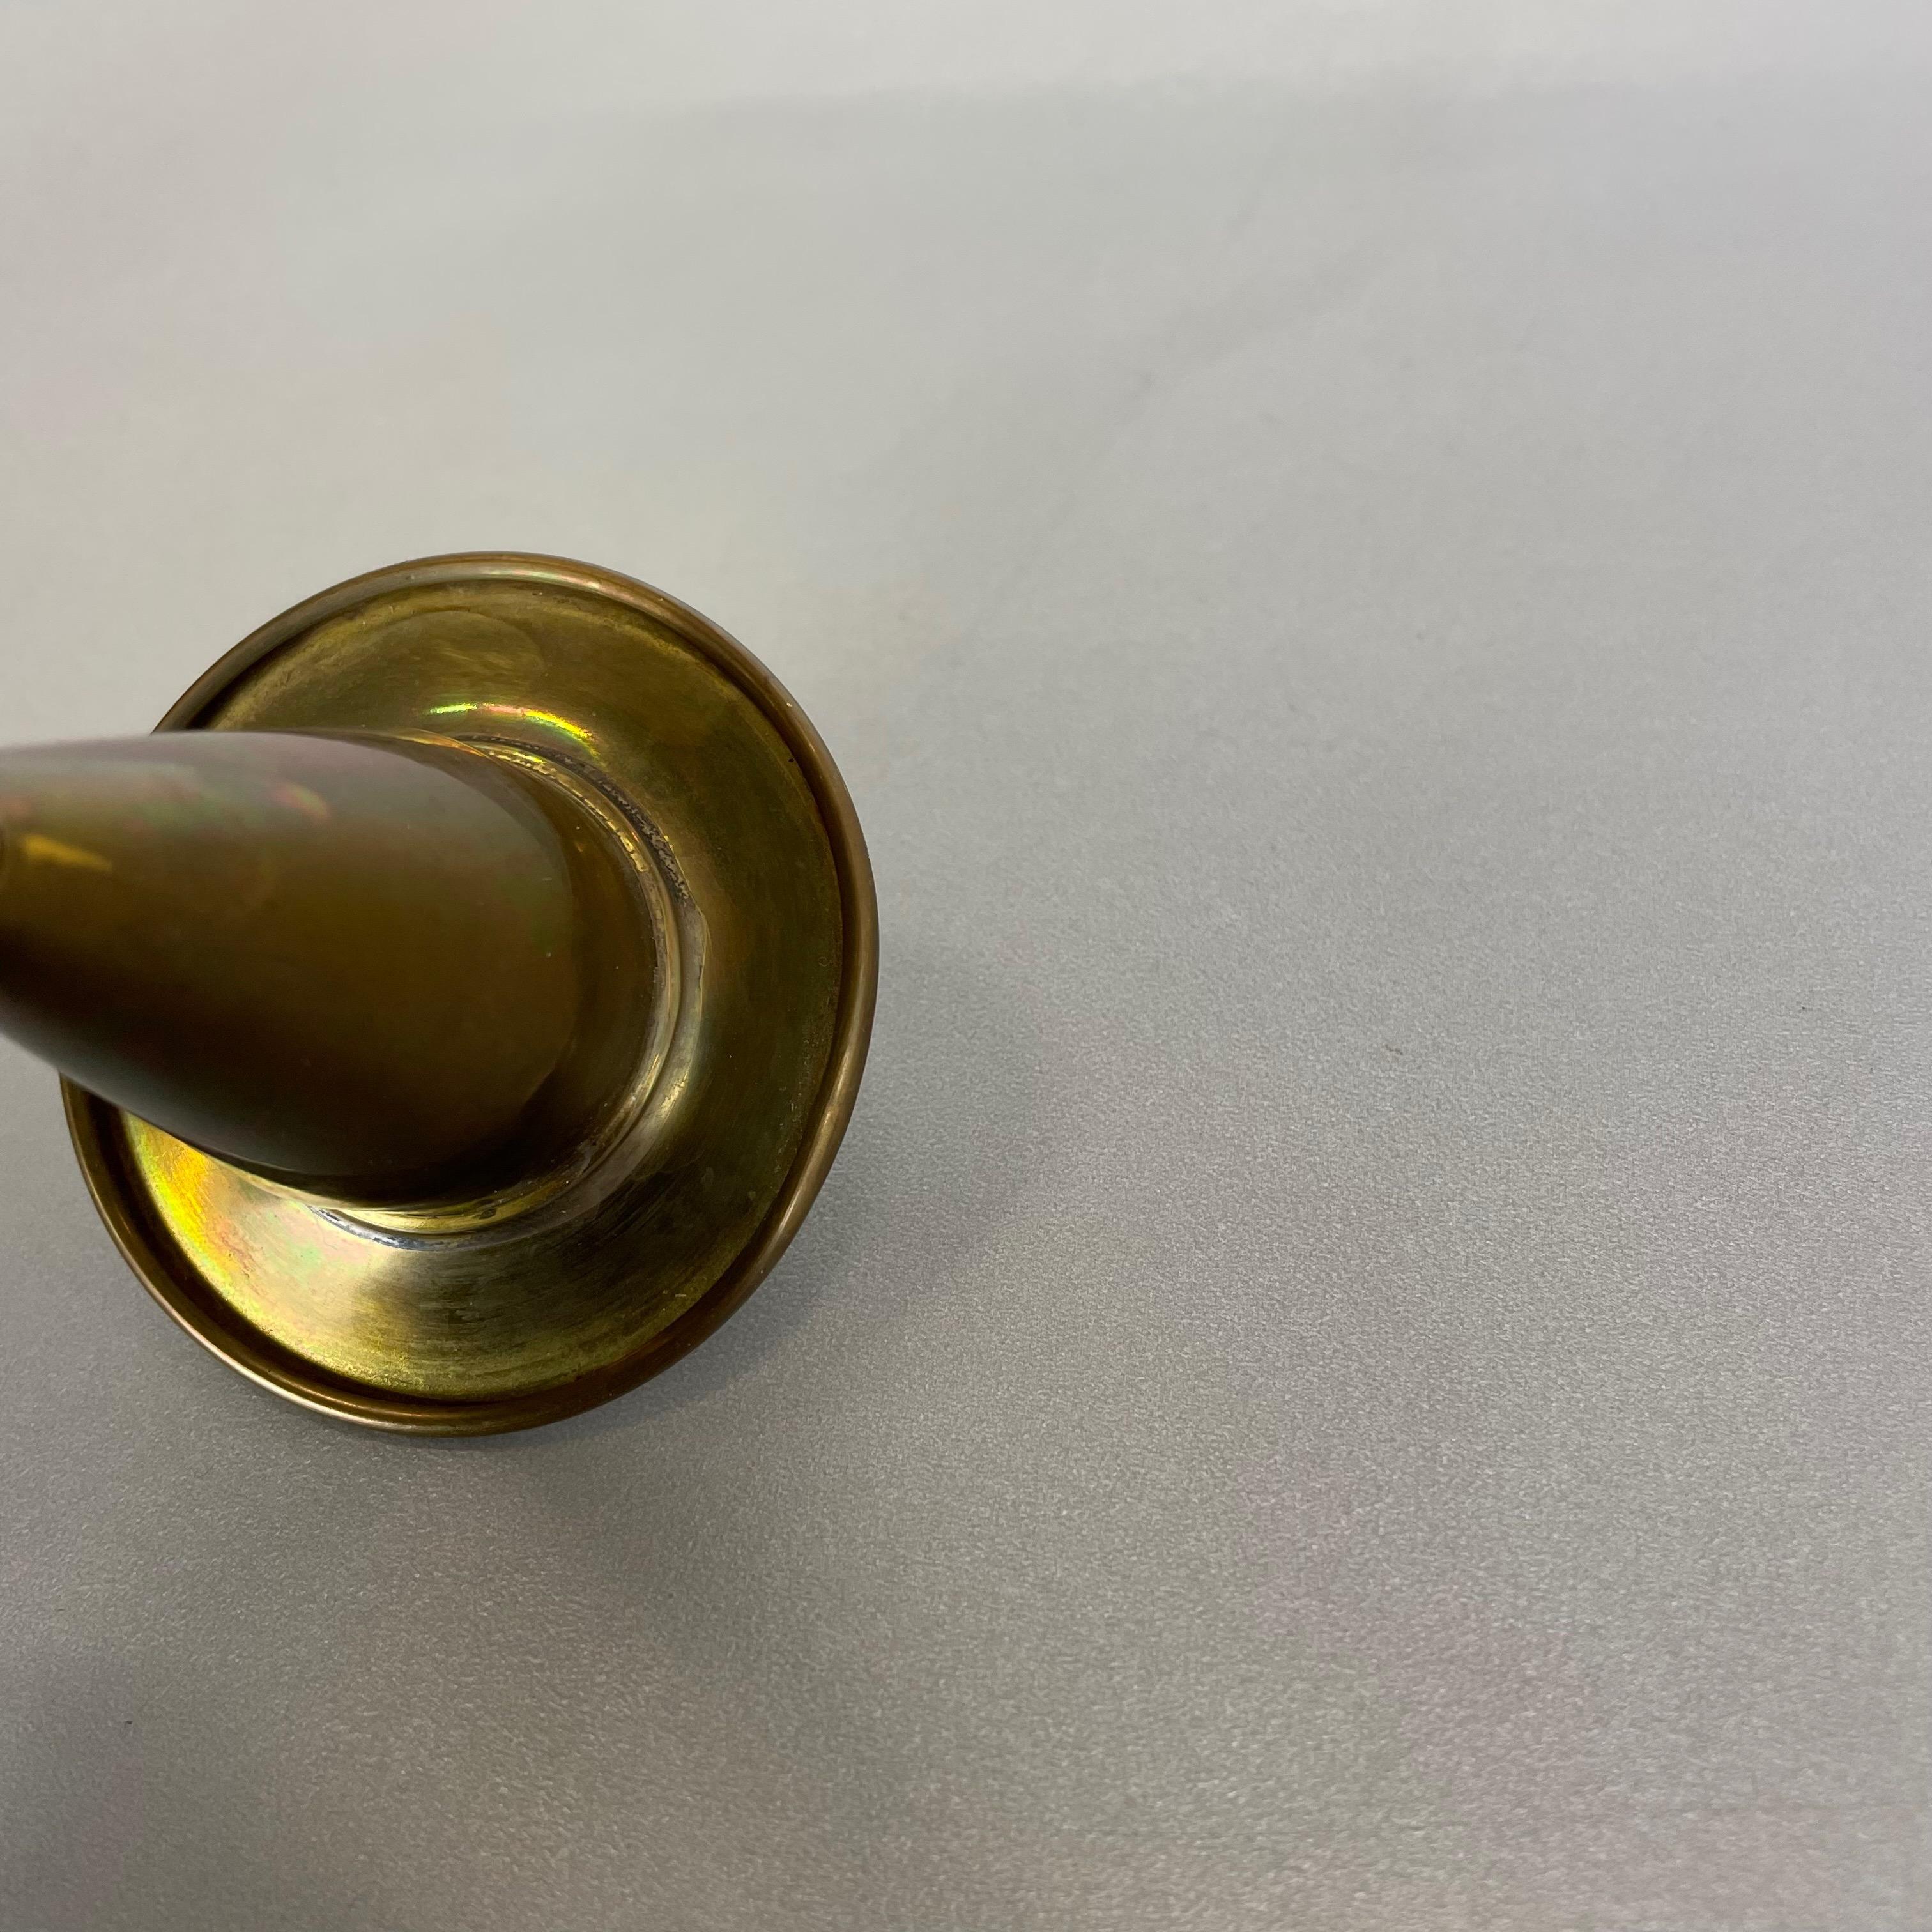 Sculptural Brass Candleholder Object by Günter Kupetz for WMF, Germany 1950s For Sale 9